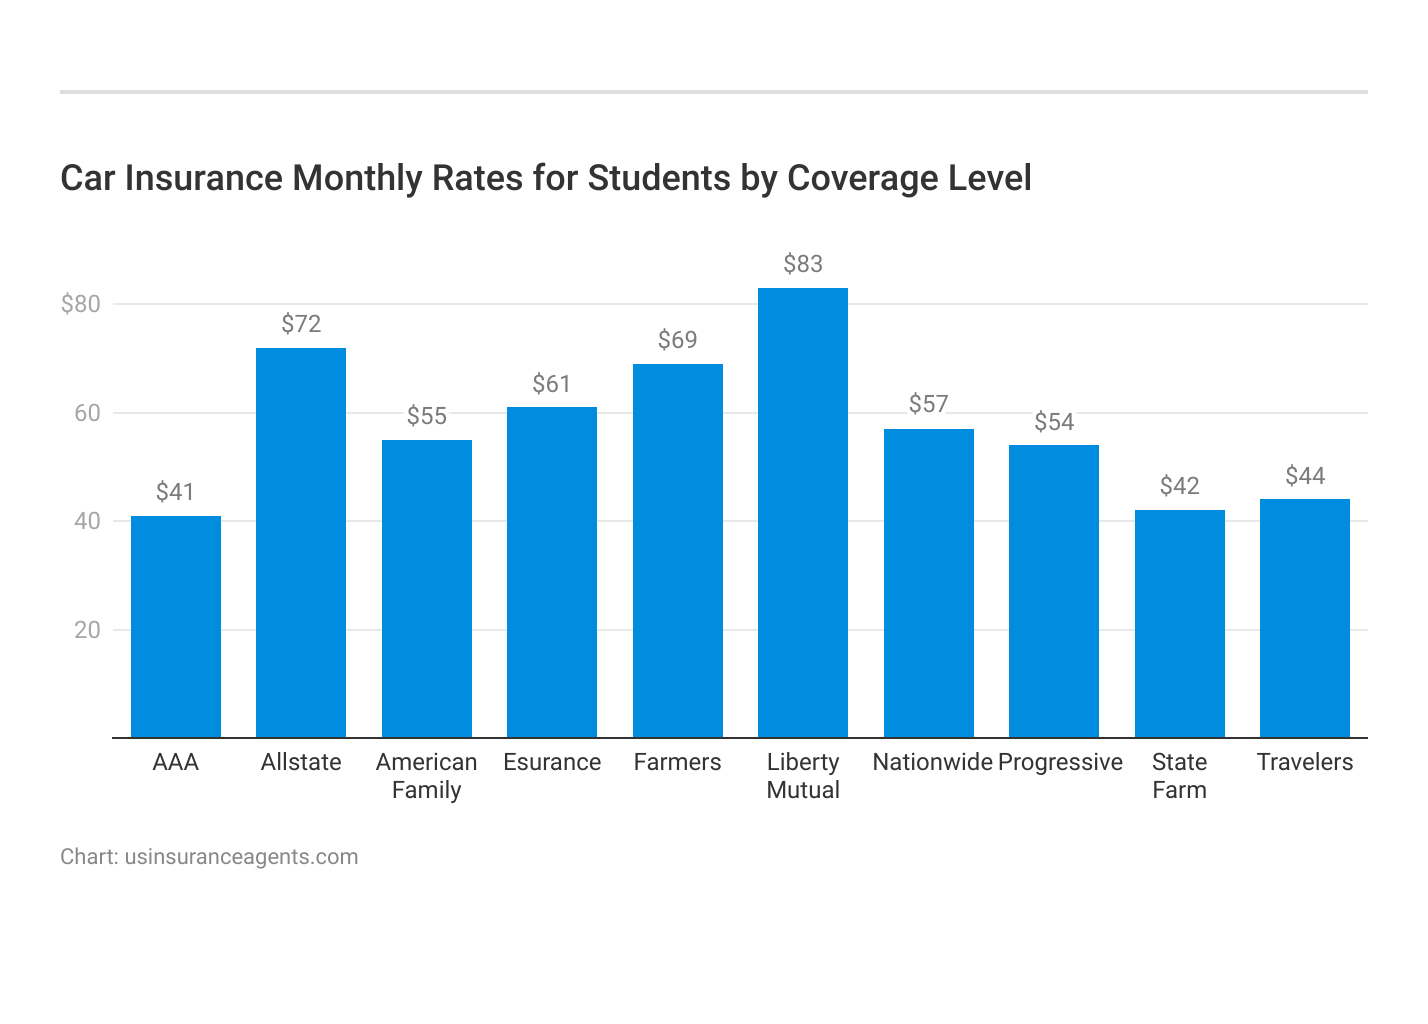 <h3>Car Insurance Monthly Rates for Students by Coverage Level</h3>